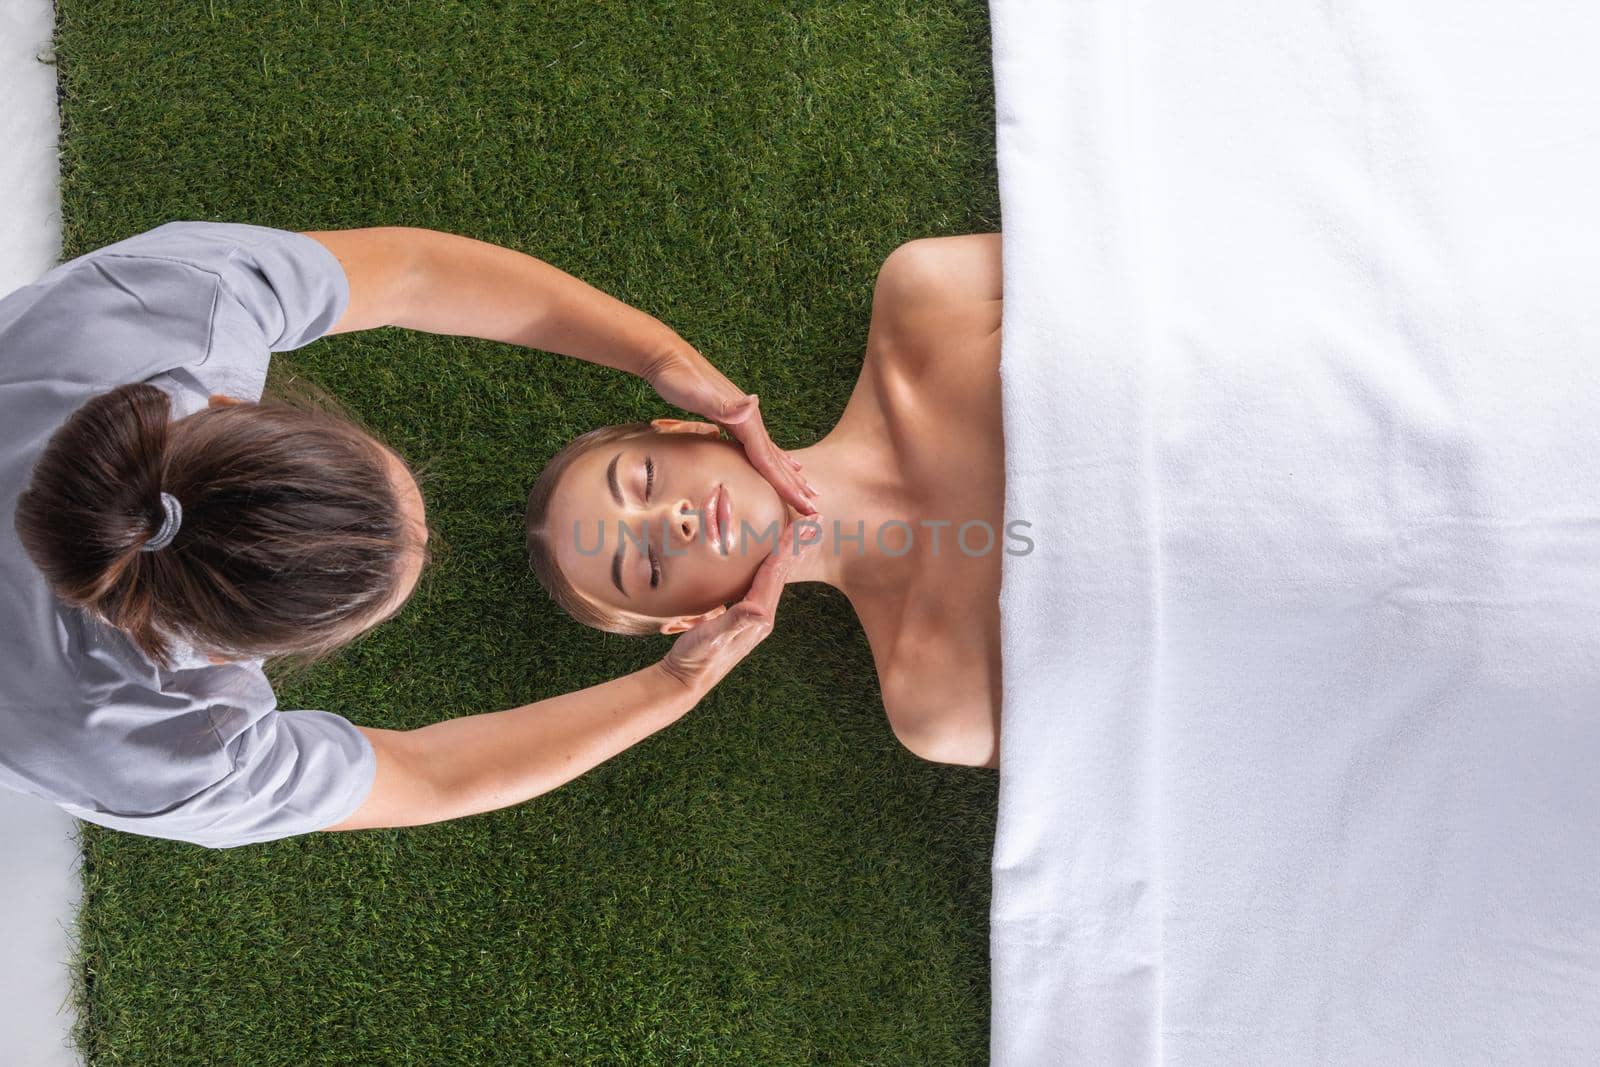 Woman at facial massage by ALotOfPeople